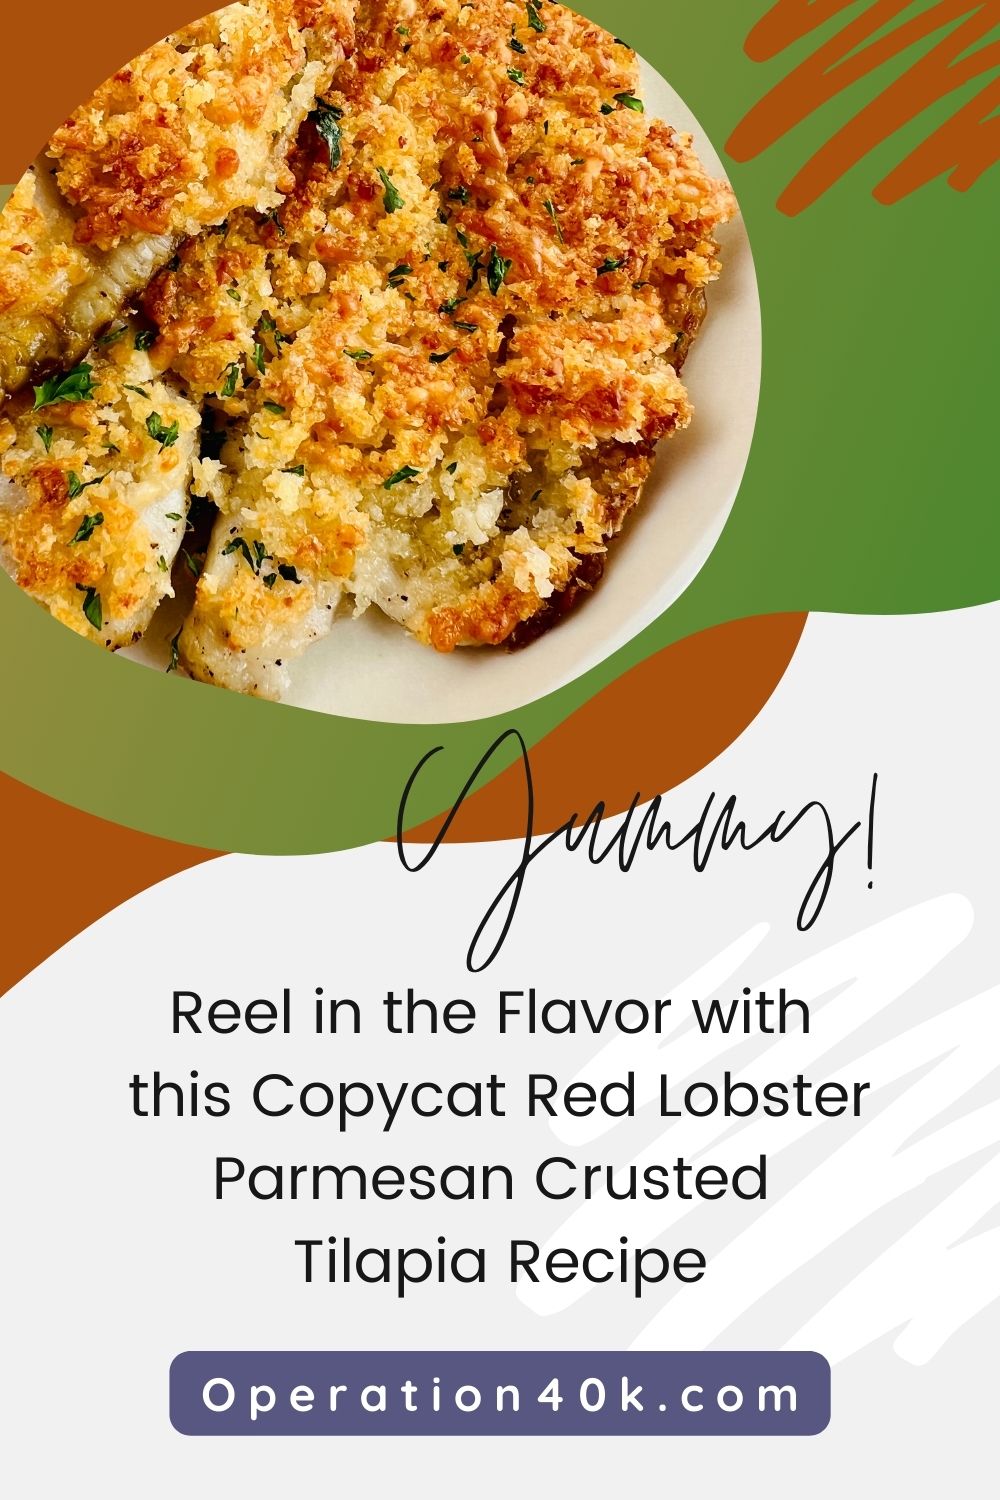 Reel in the Flavor with This Copycat Red Lobster Parmesan Crusted Tilapia Recipe